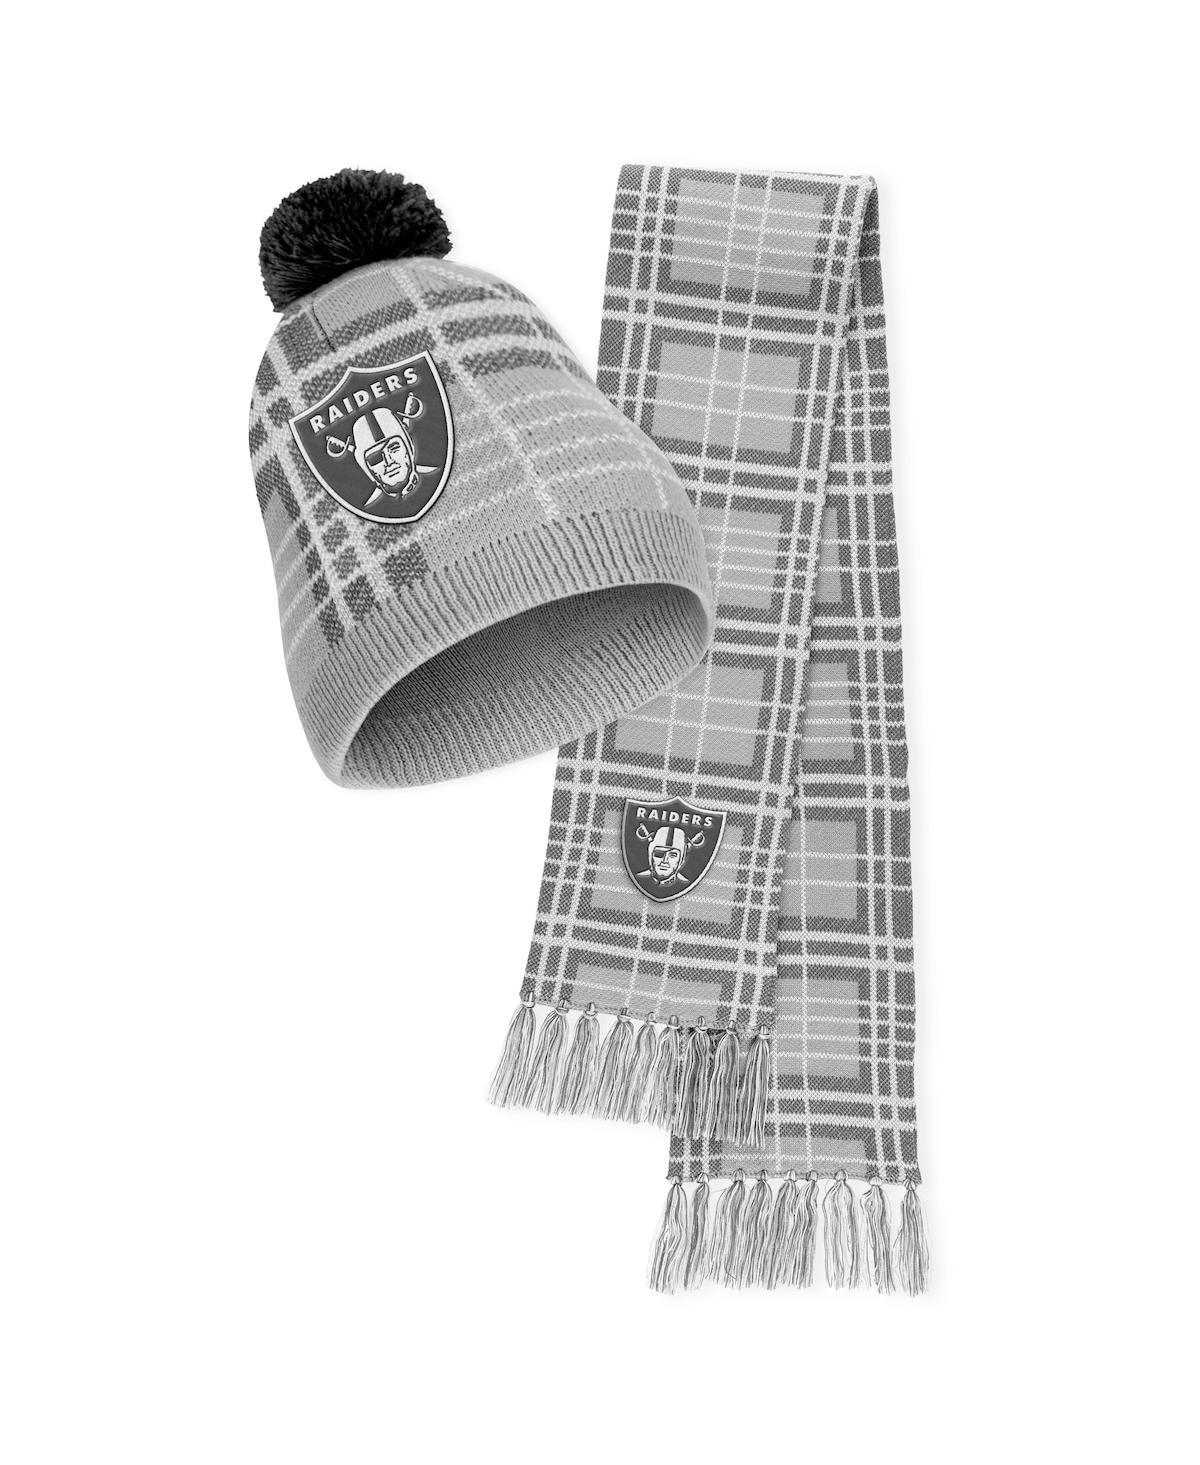 WEAR by Erin Andrews Women's Black Las Vegas Raiders Colorblock Cuffed Knit  Hat with Pom and Scarf Set